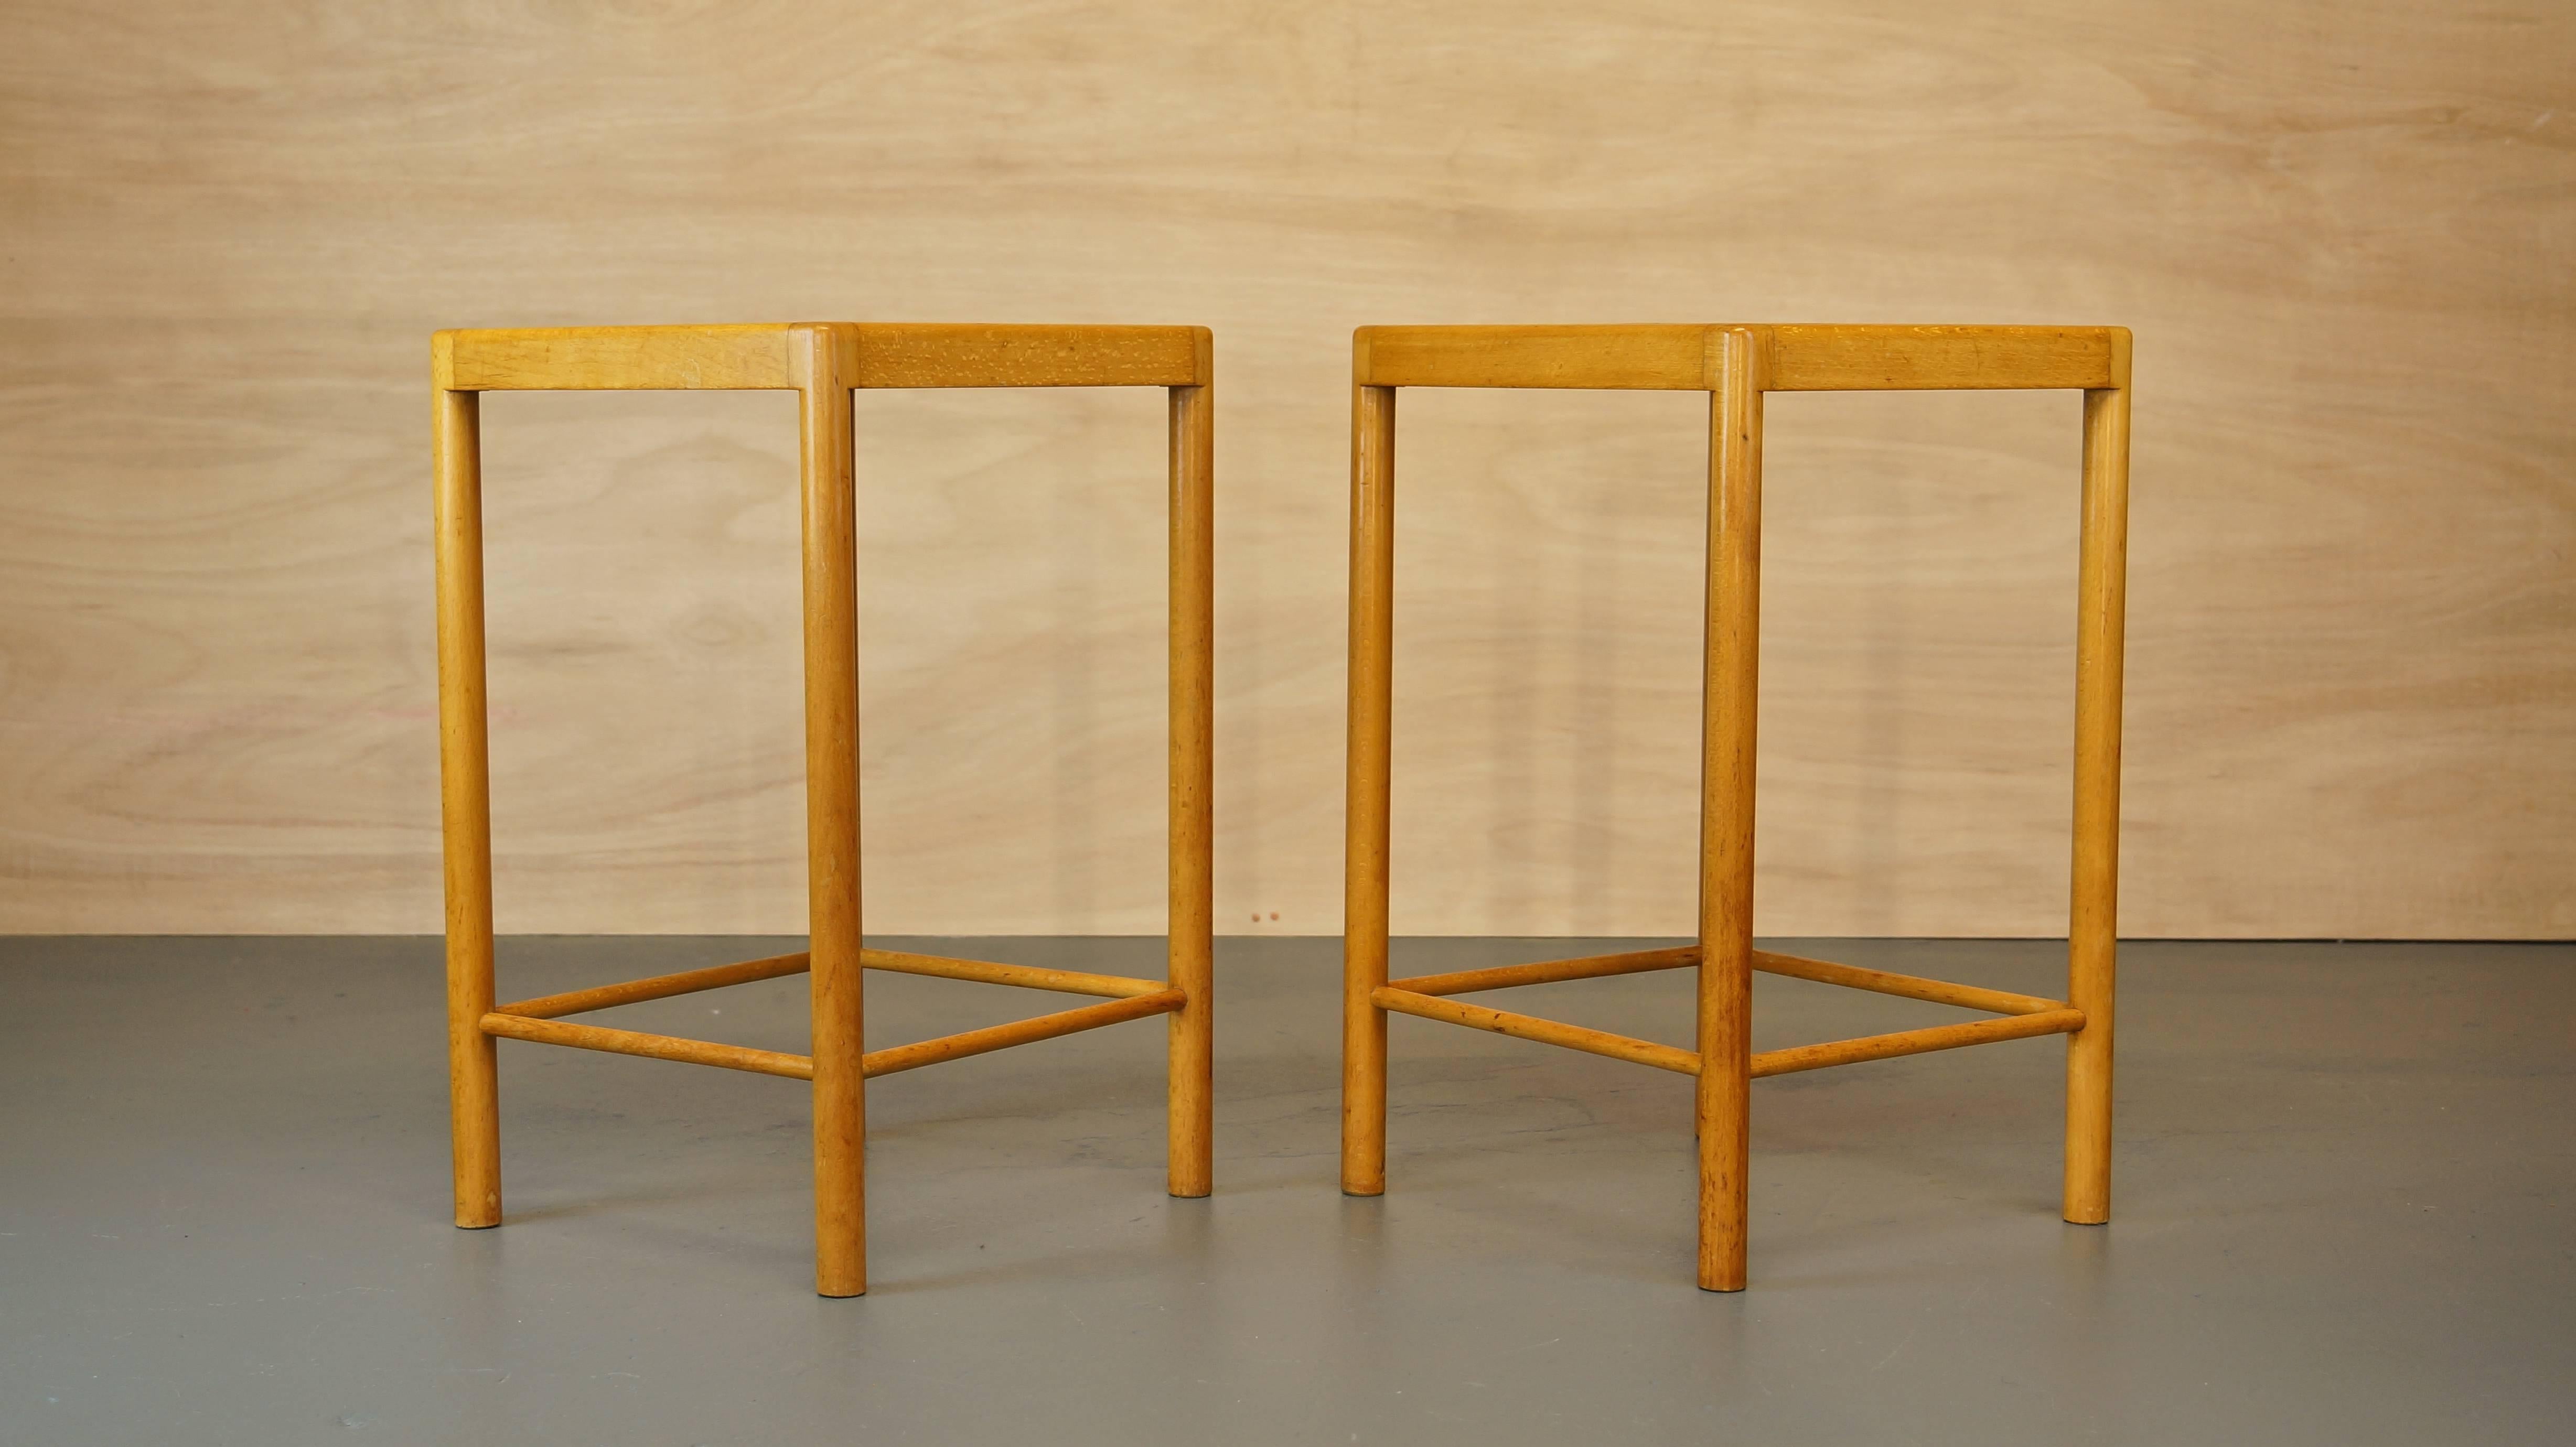 Pair of rare early vintage Fritz Hansen side/end tables in beech, 1940s.

Confirmed in writing by Fritz Hansen to be early production side tables by Ole Wanscher, a very rare model.

From the same range as the nesting tables also designed by Ole